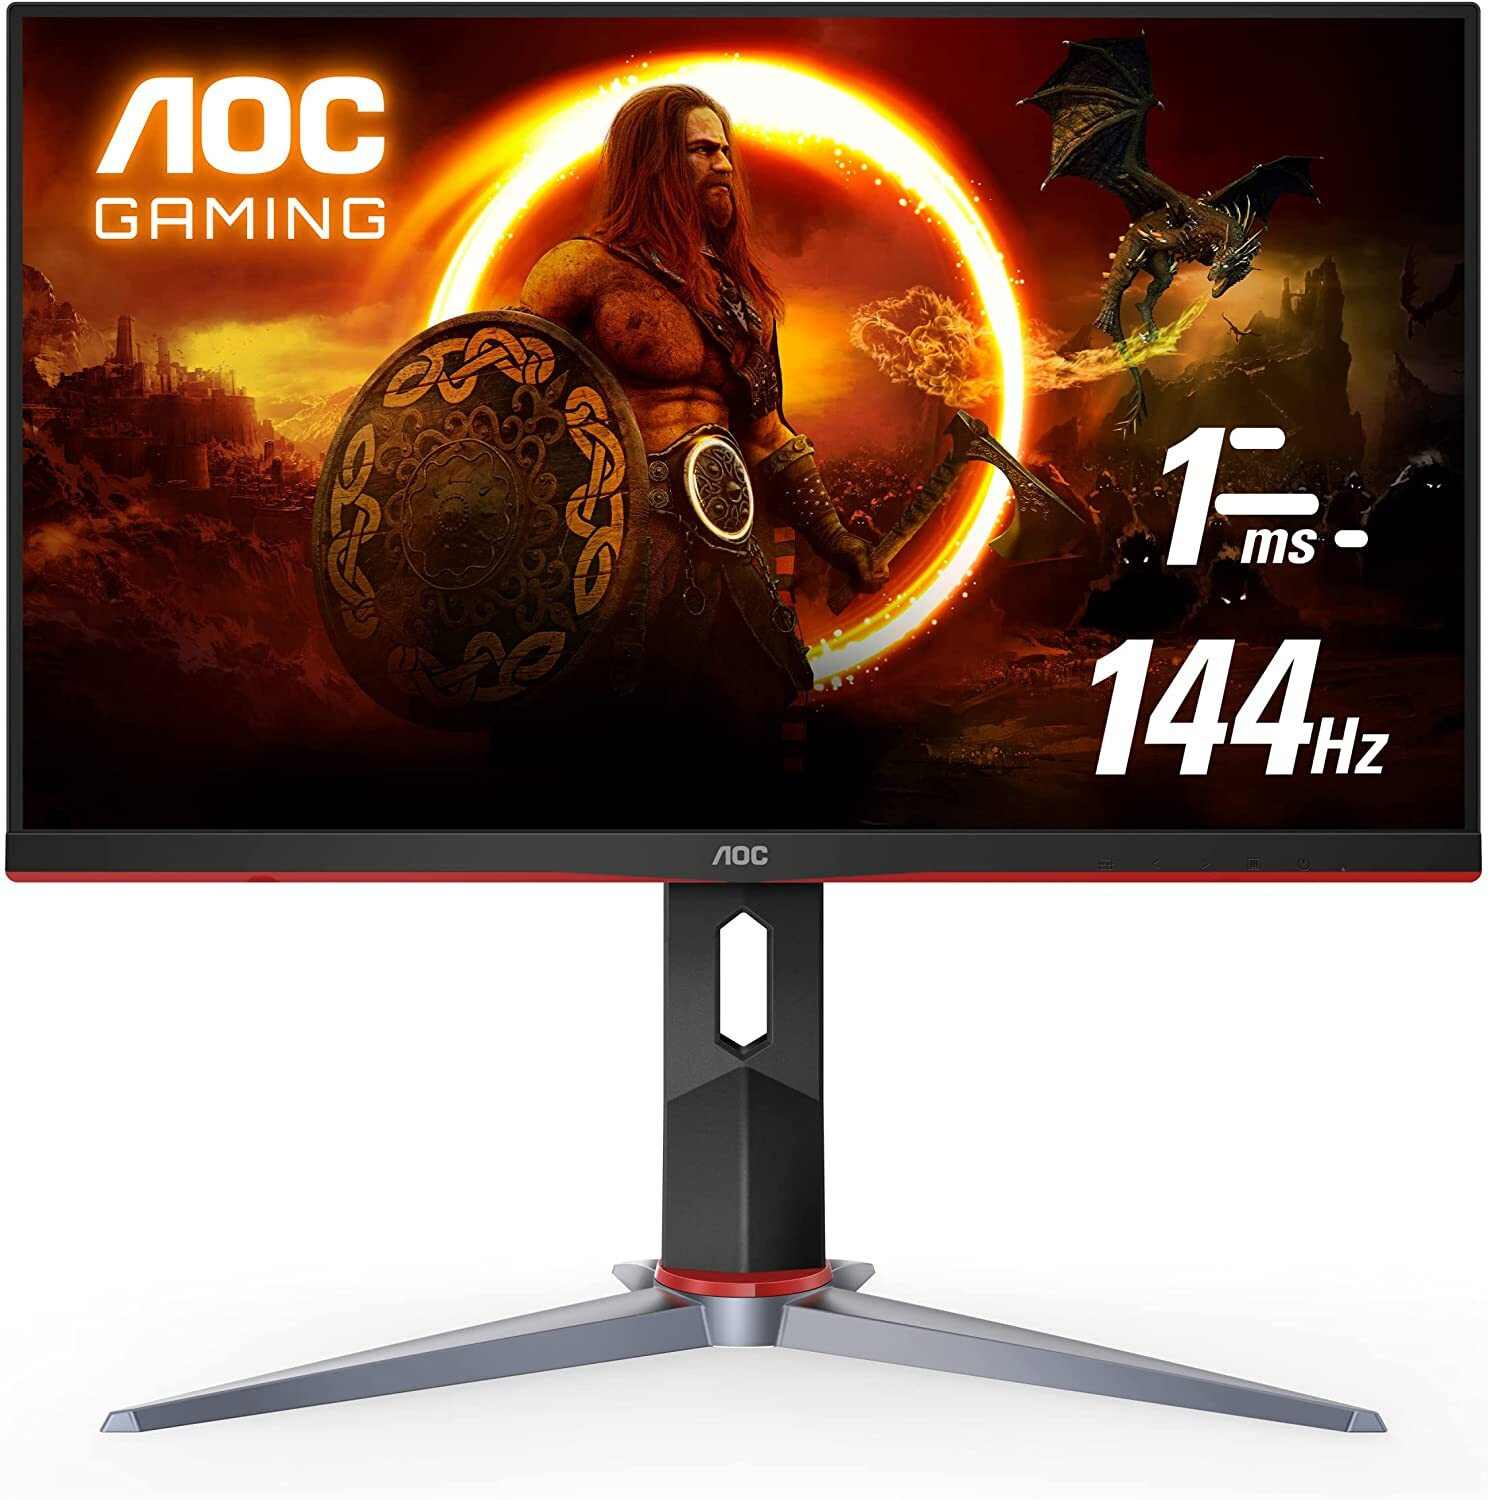 The Best Gaming Monitor Under 300$ 2022: AOC 24G2